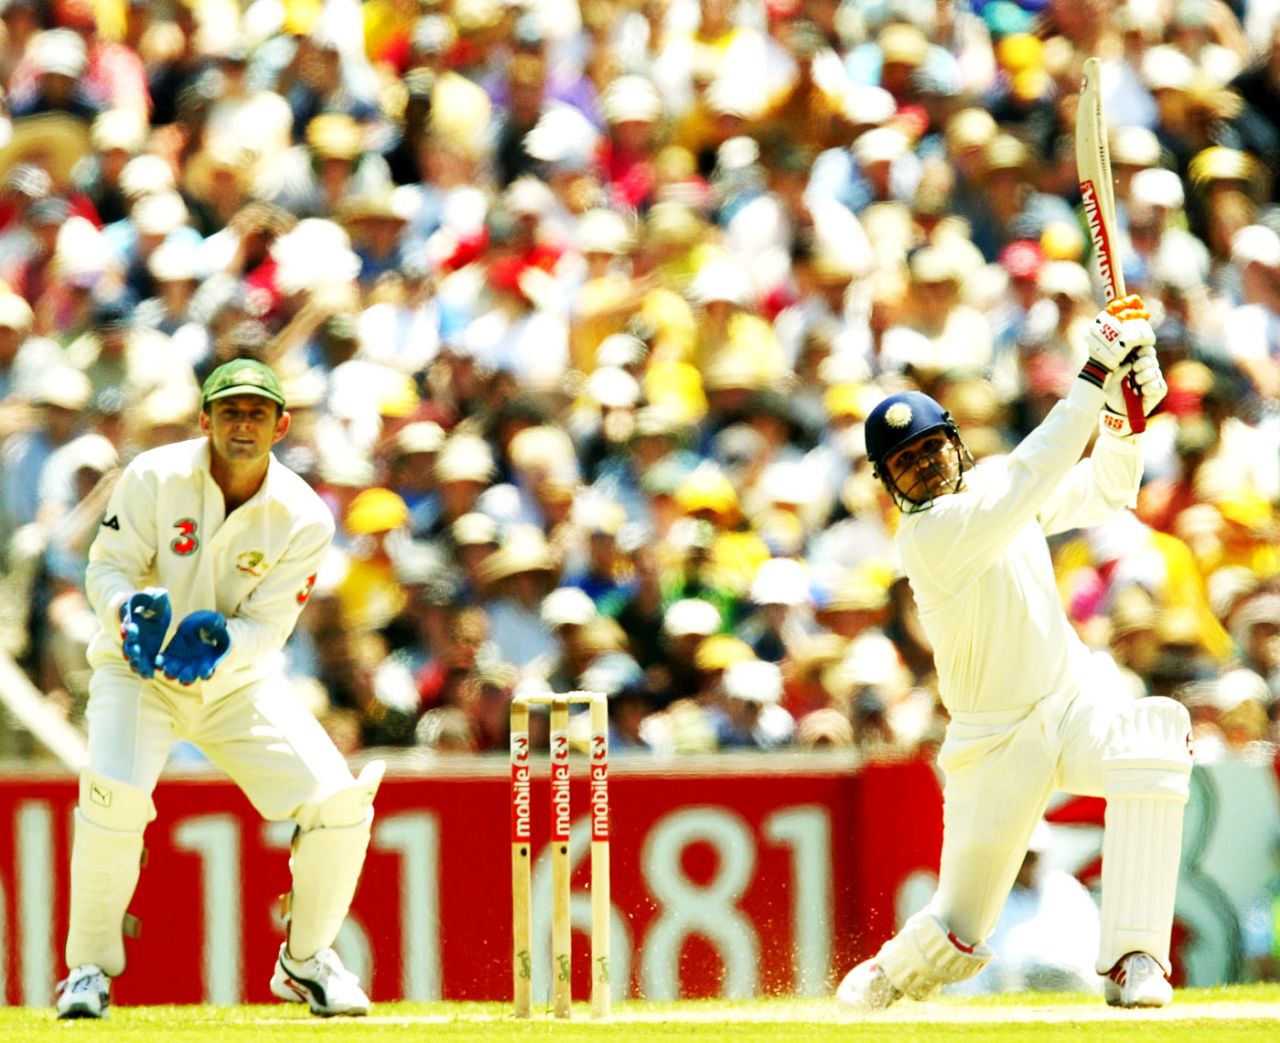 Virender Sehwag launches into a big drive, Australia v India, 3rd Test, Melbourne, 1st day, December 26, 2003